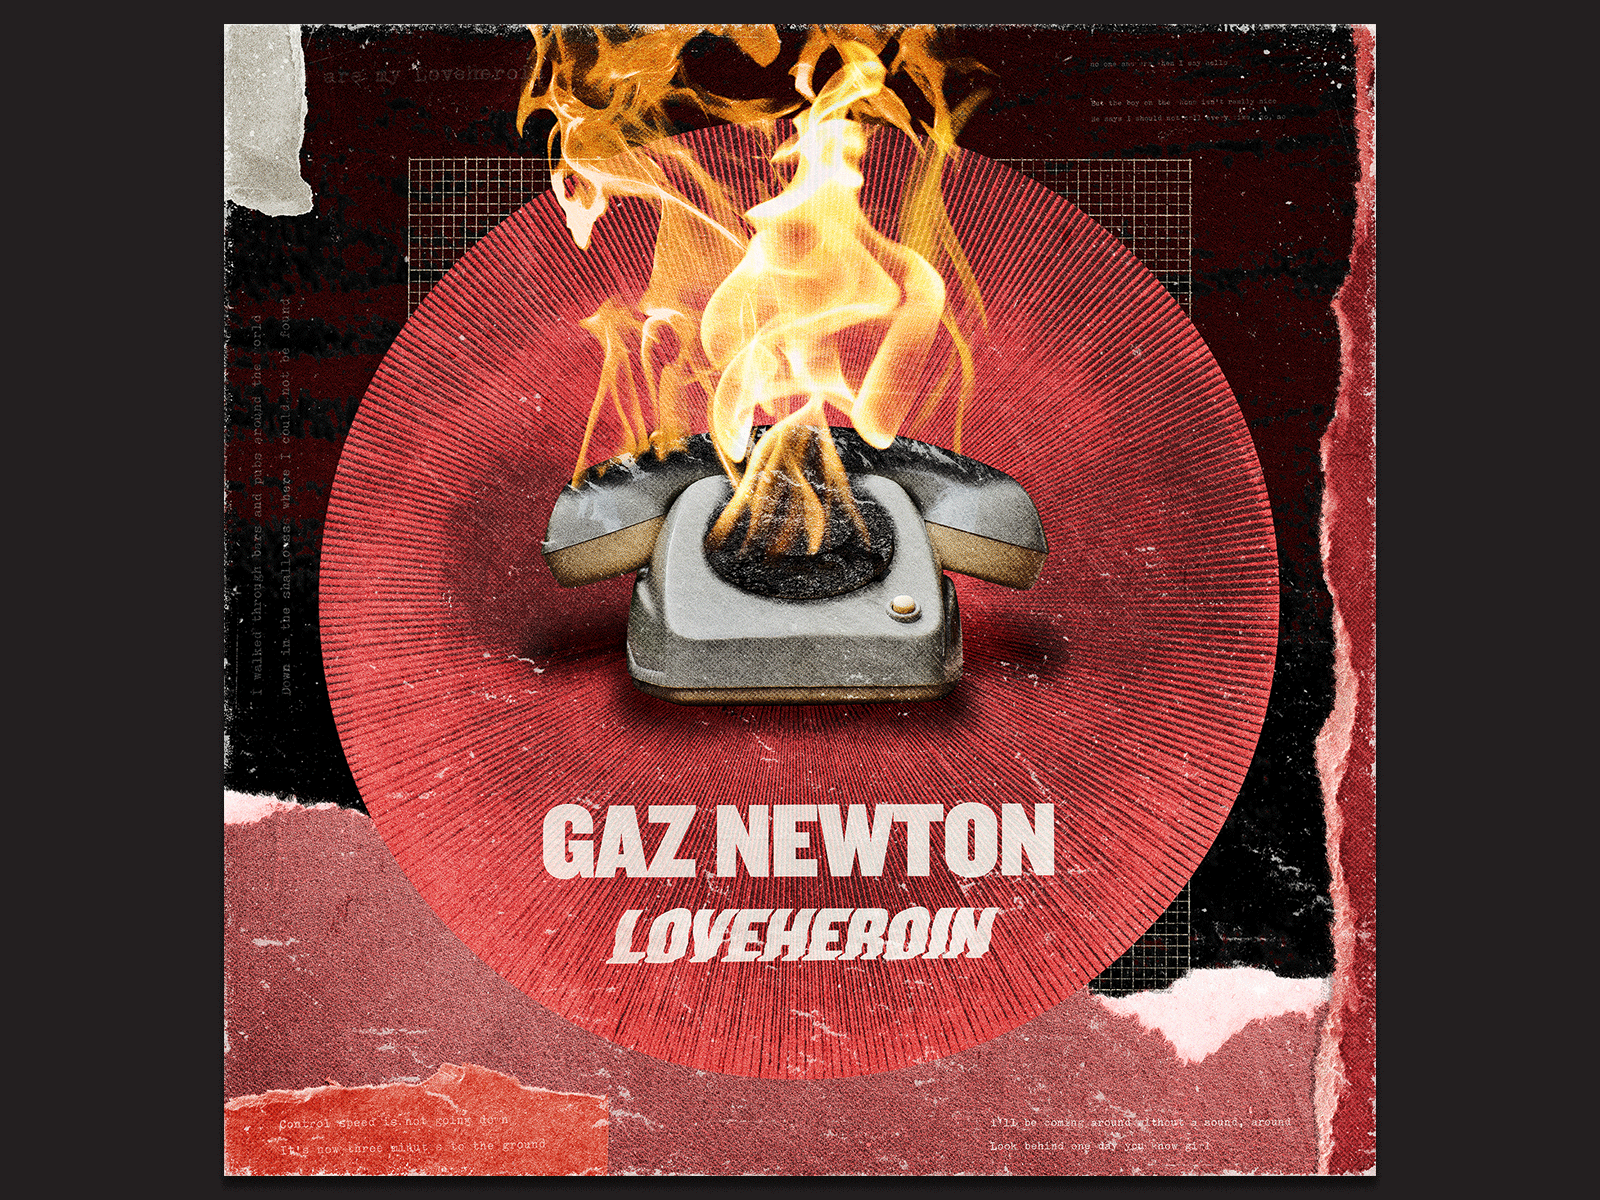 Gaz Newton - Loveheroin [EP] (scrapped) album art collage collage art distorted type flames sbh scanner type surreal telephone texture the shop typography weird